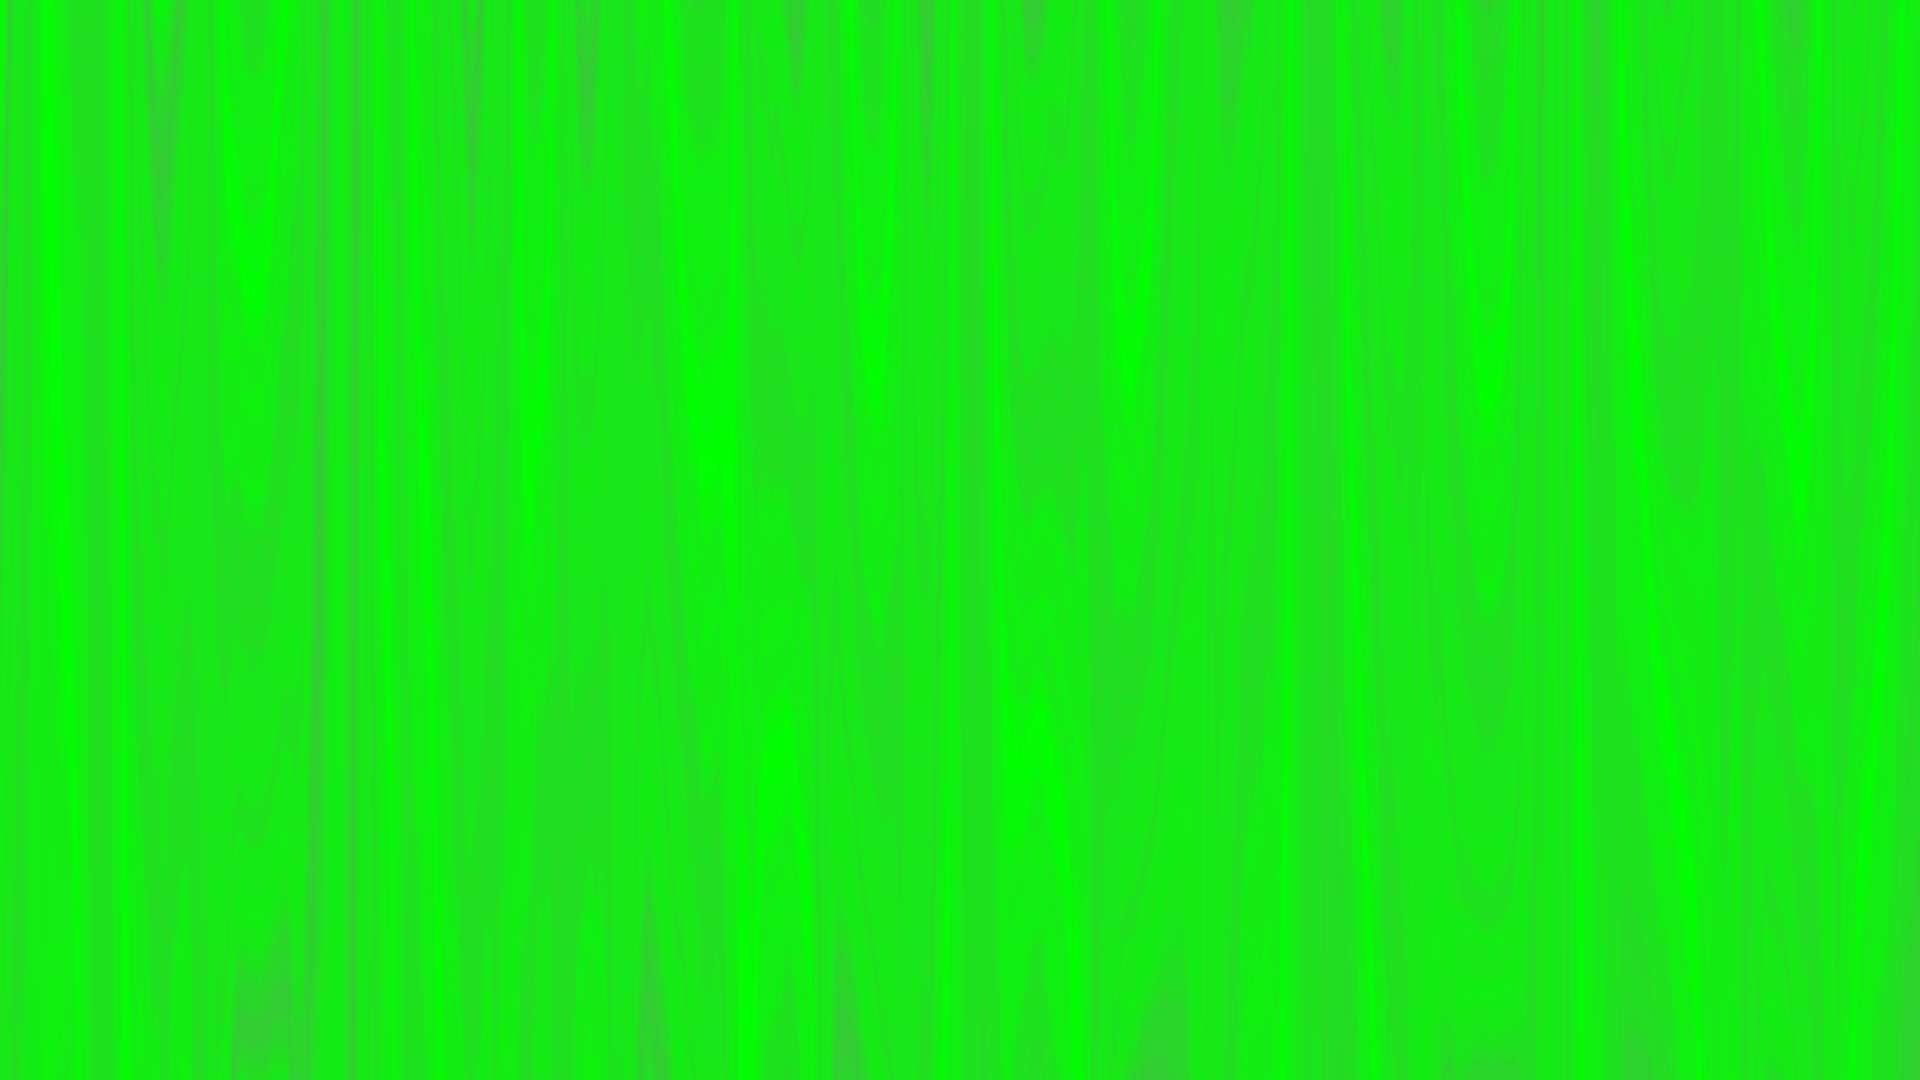 Green Screen Background Image